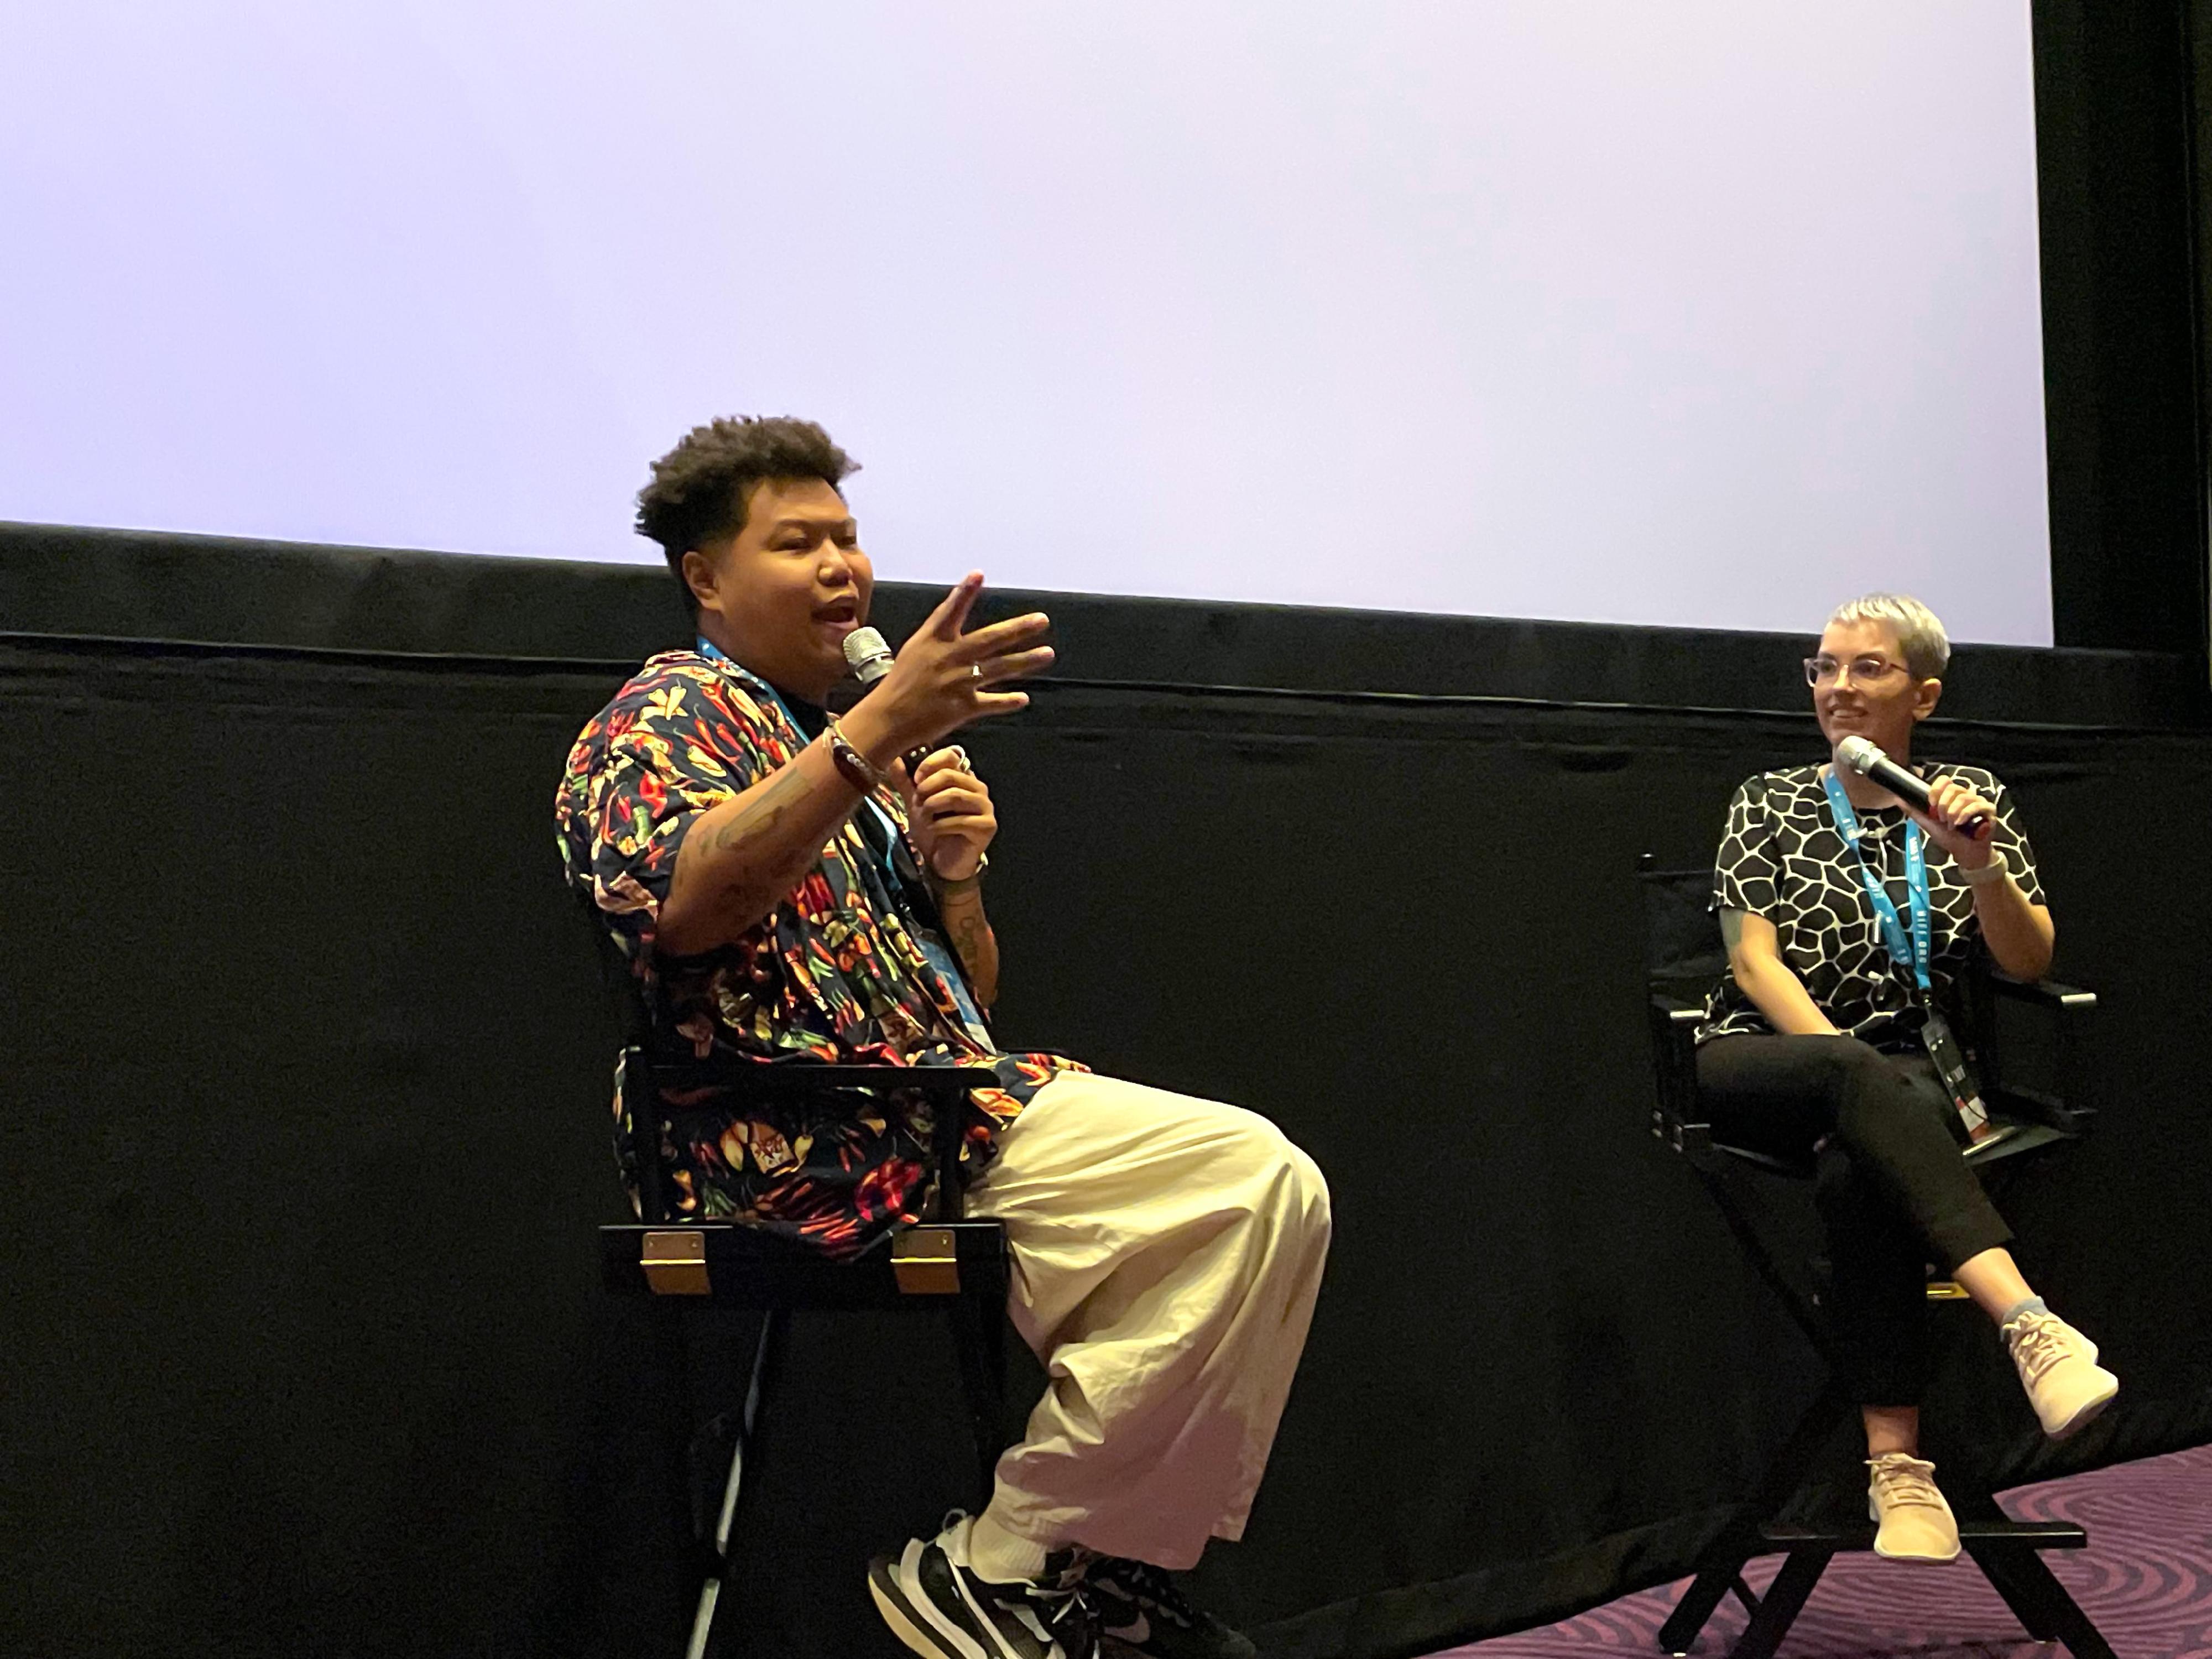 The Hong Kong Economic and Trade Office in San Francisco has sponsored the 42nd Hawai'i International Film Festival, which featured "Spotlight on Hong Kong" as part of its special presentation to showcase Hong Kong movies. Photo shows the director of "Chilli Laugh Story", Coba Cheng (left), speaking on his experience in making his debut film at the screening of the film at the festival on November 5 (Honolulu time) in Honolulu.